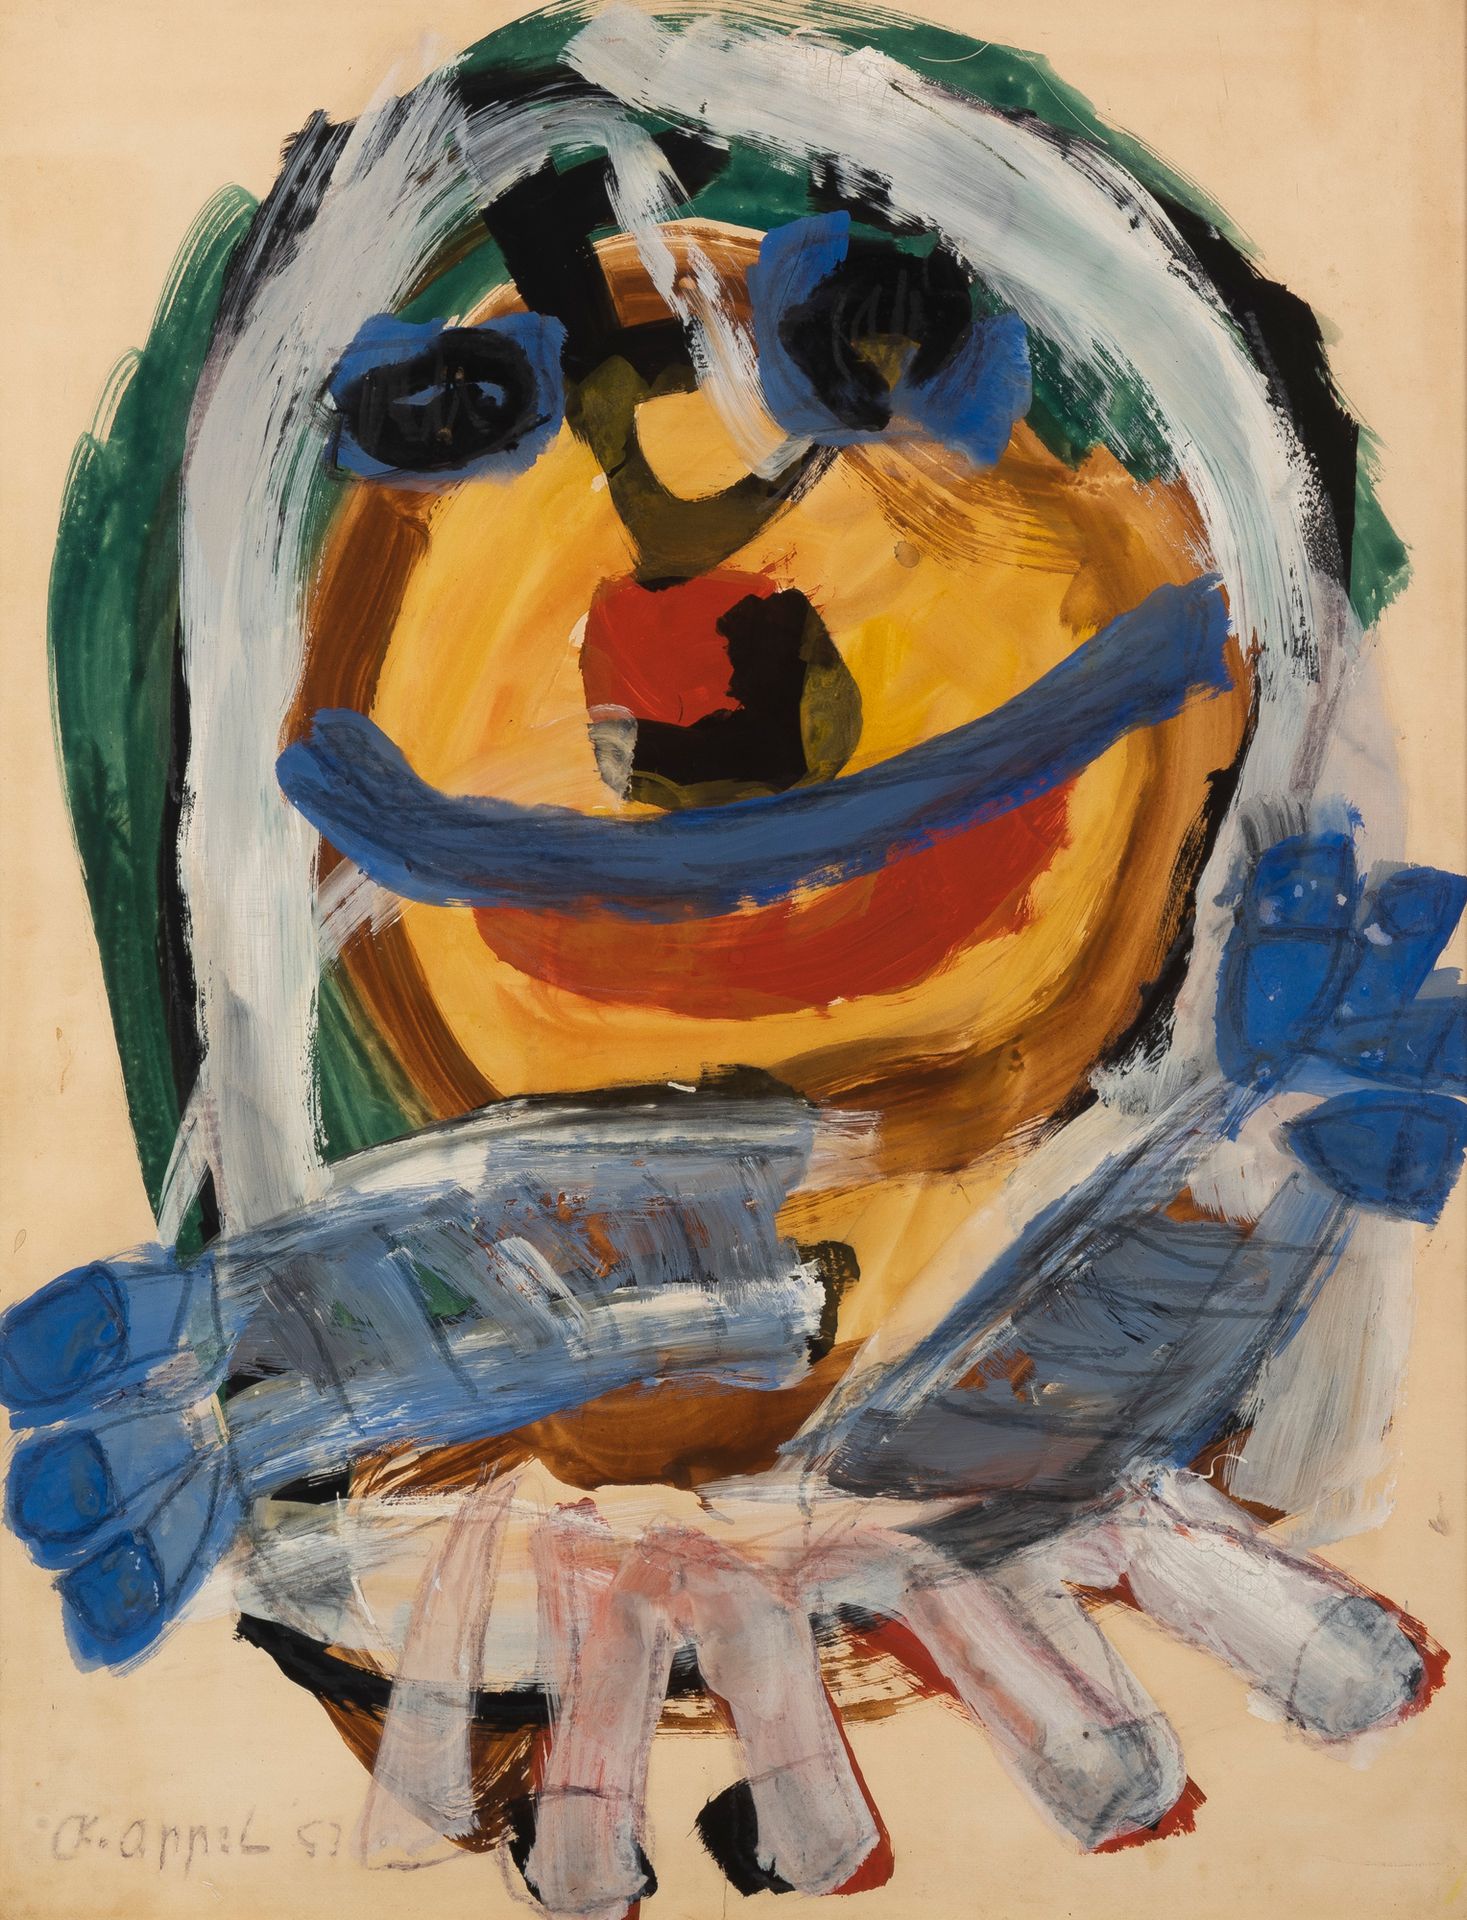 Karel Appel (1921-2006) Composition 3, 1953
Gouache on paper mounted on canvas.
&hellip;